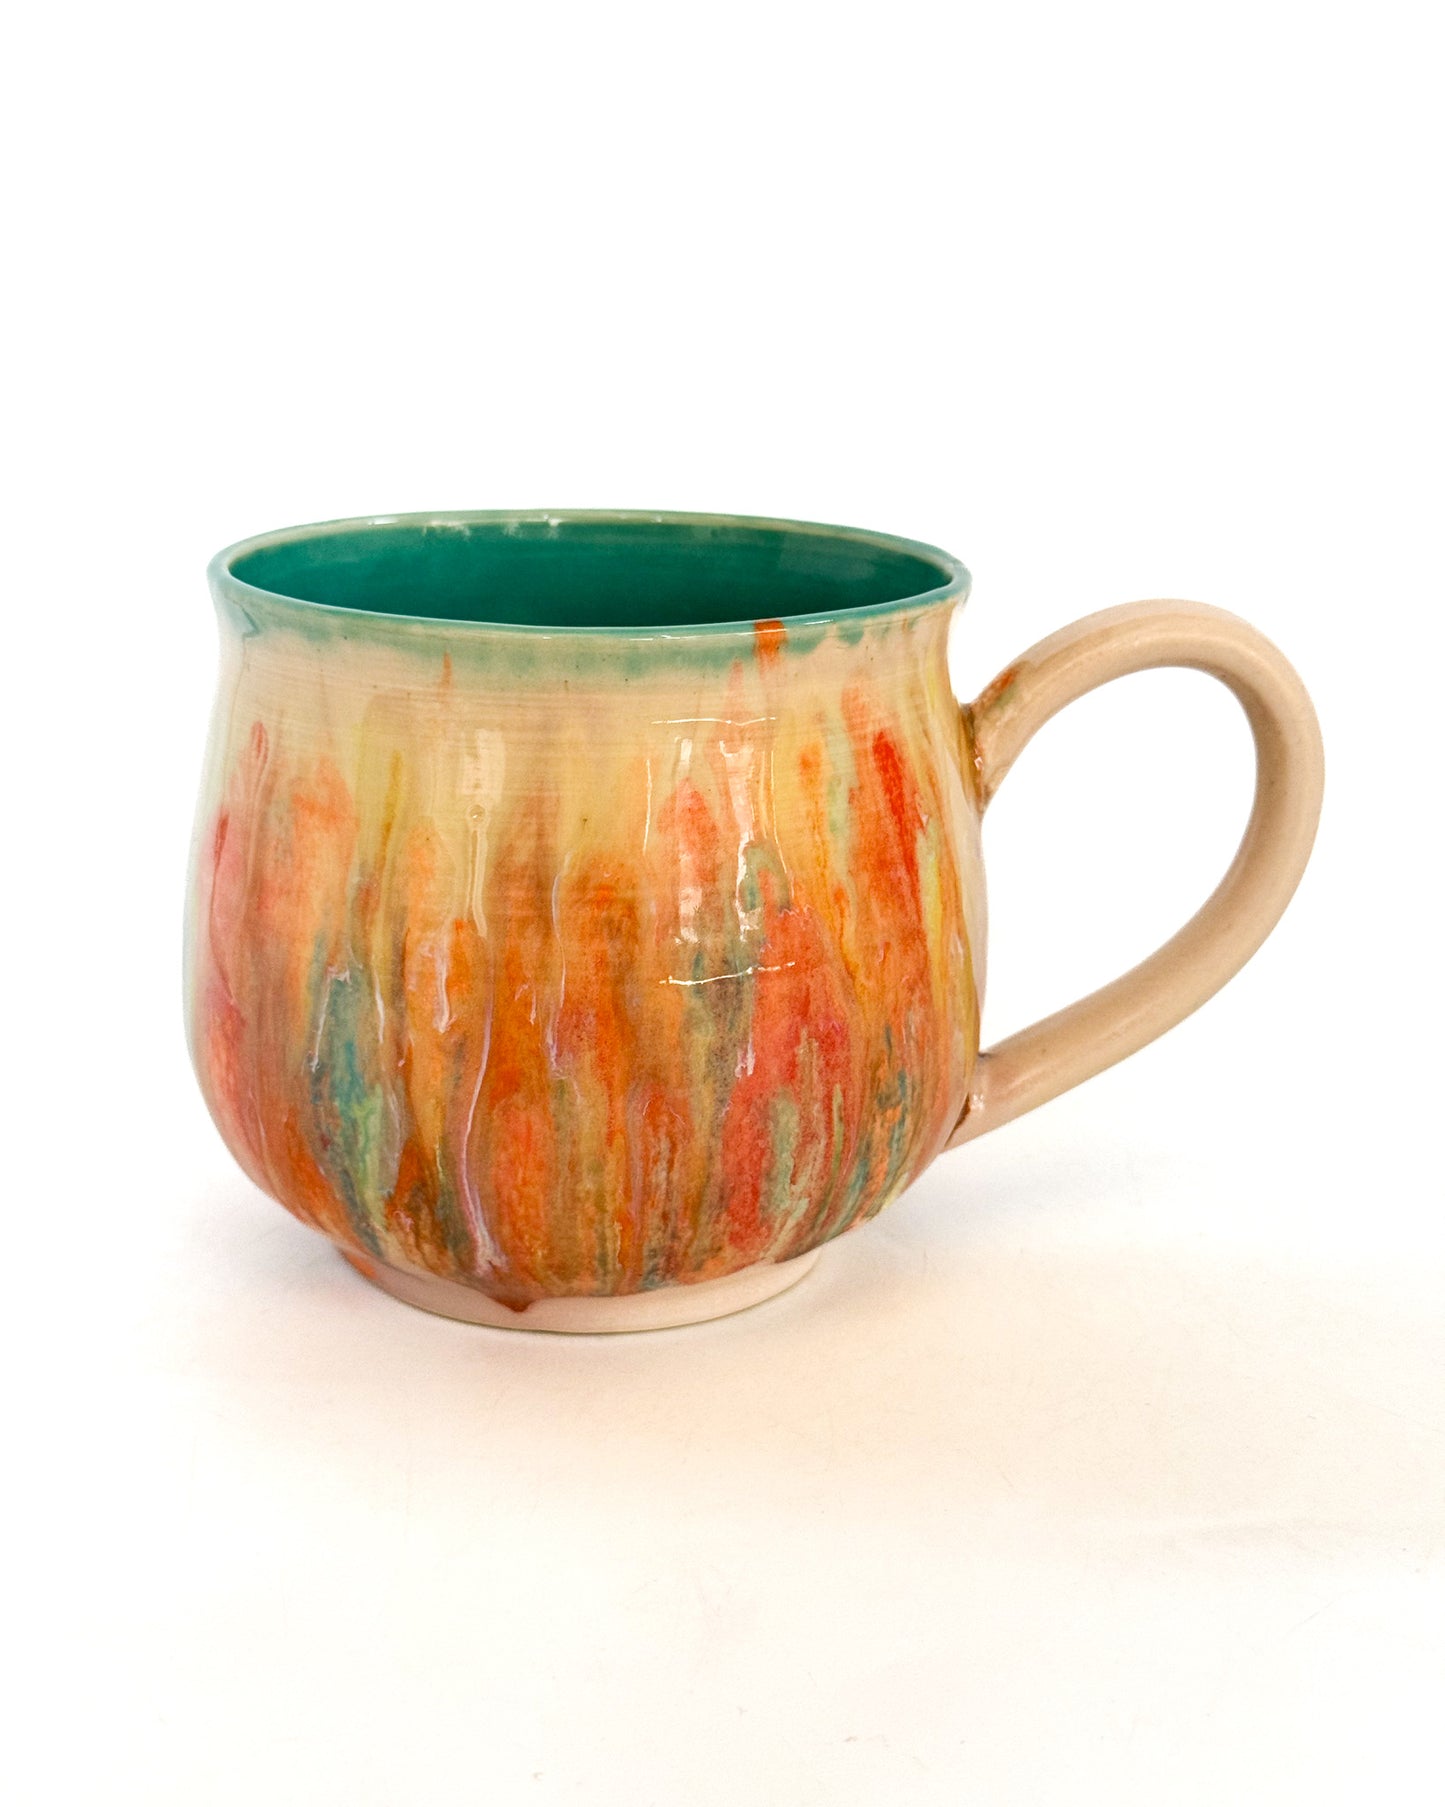 Cryptid Cutie Mug with Sherbert Drips | Sitting Mothman with Teal Interior | SECONDS